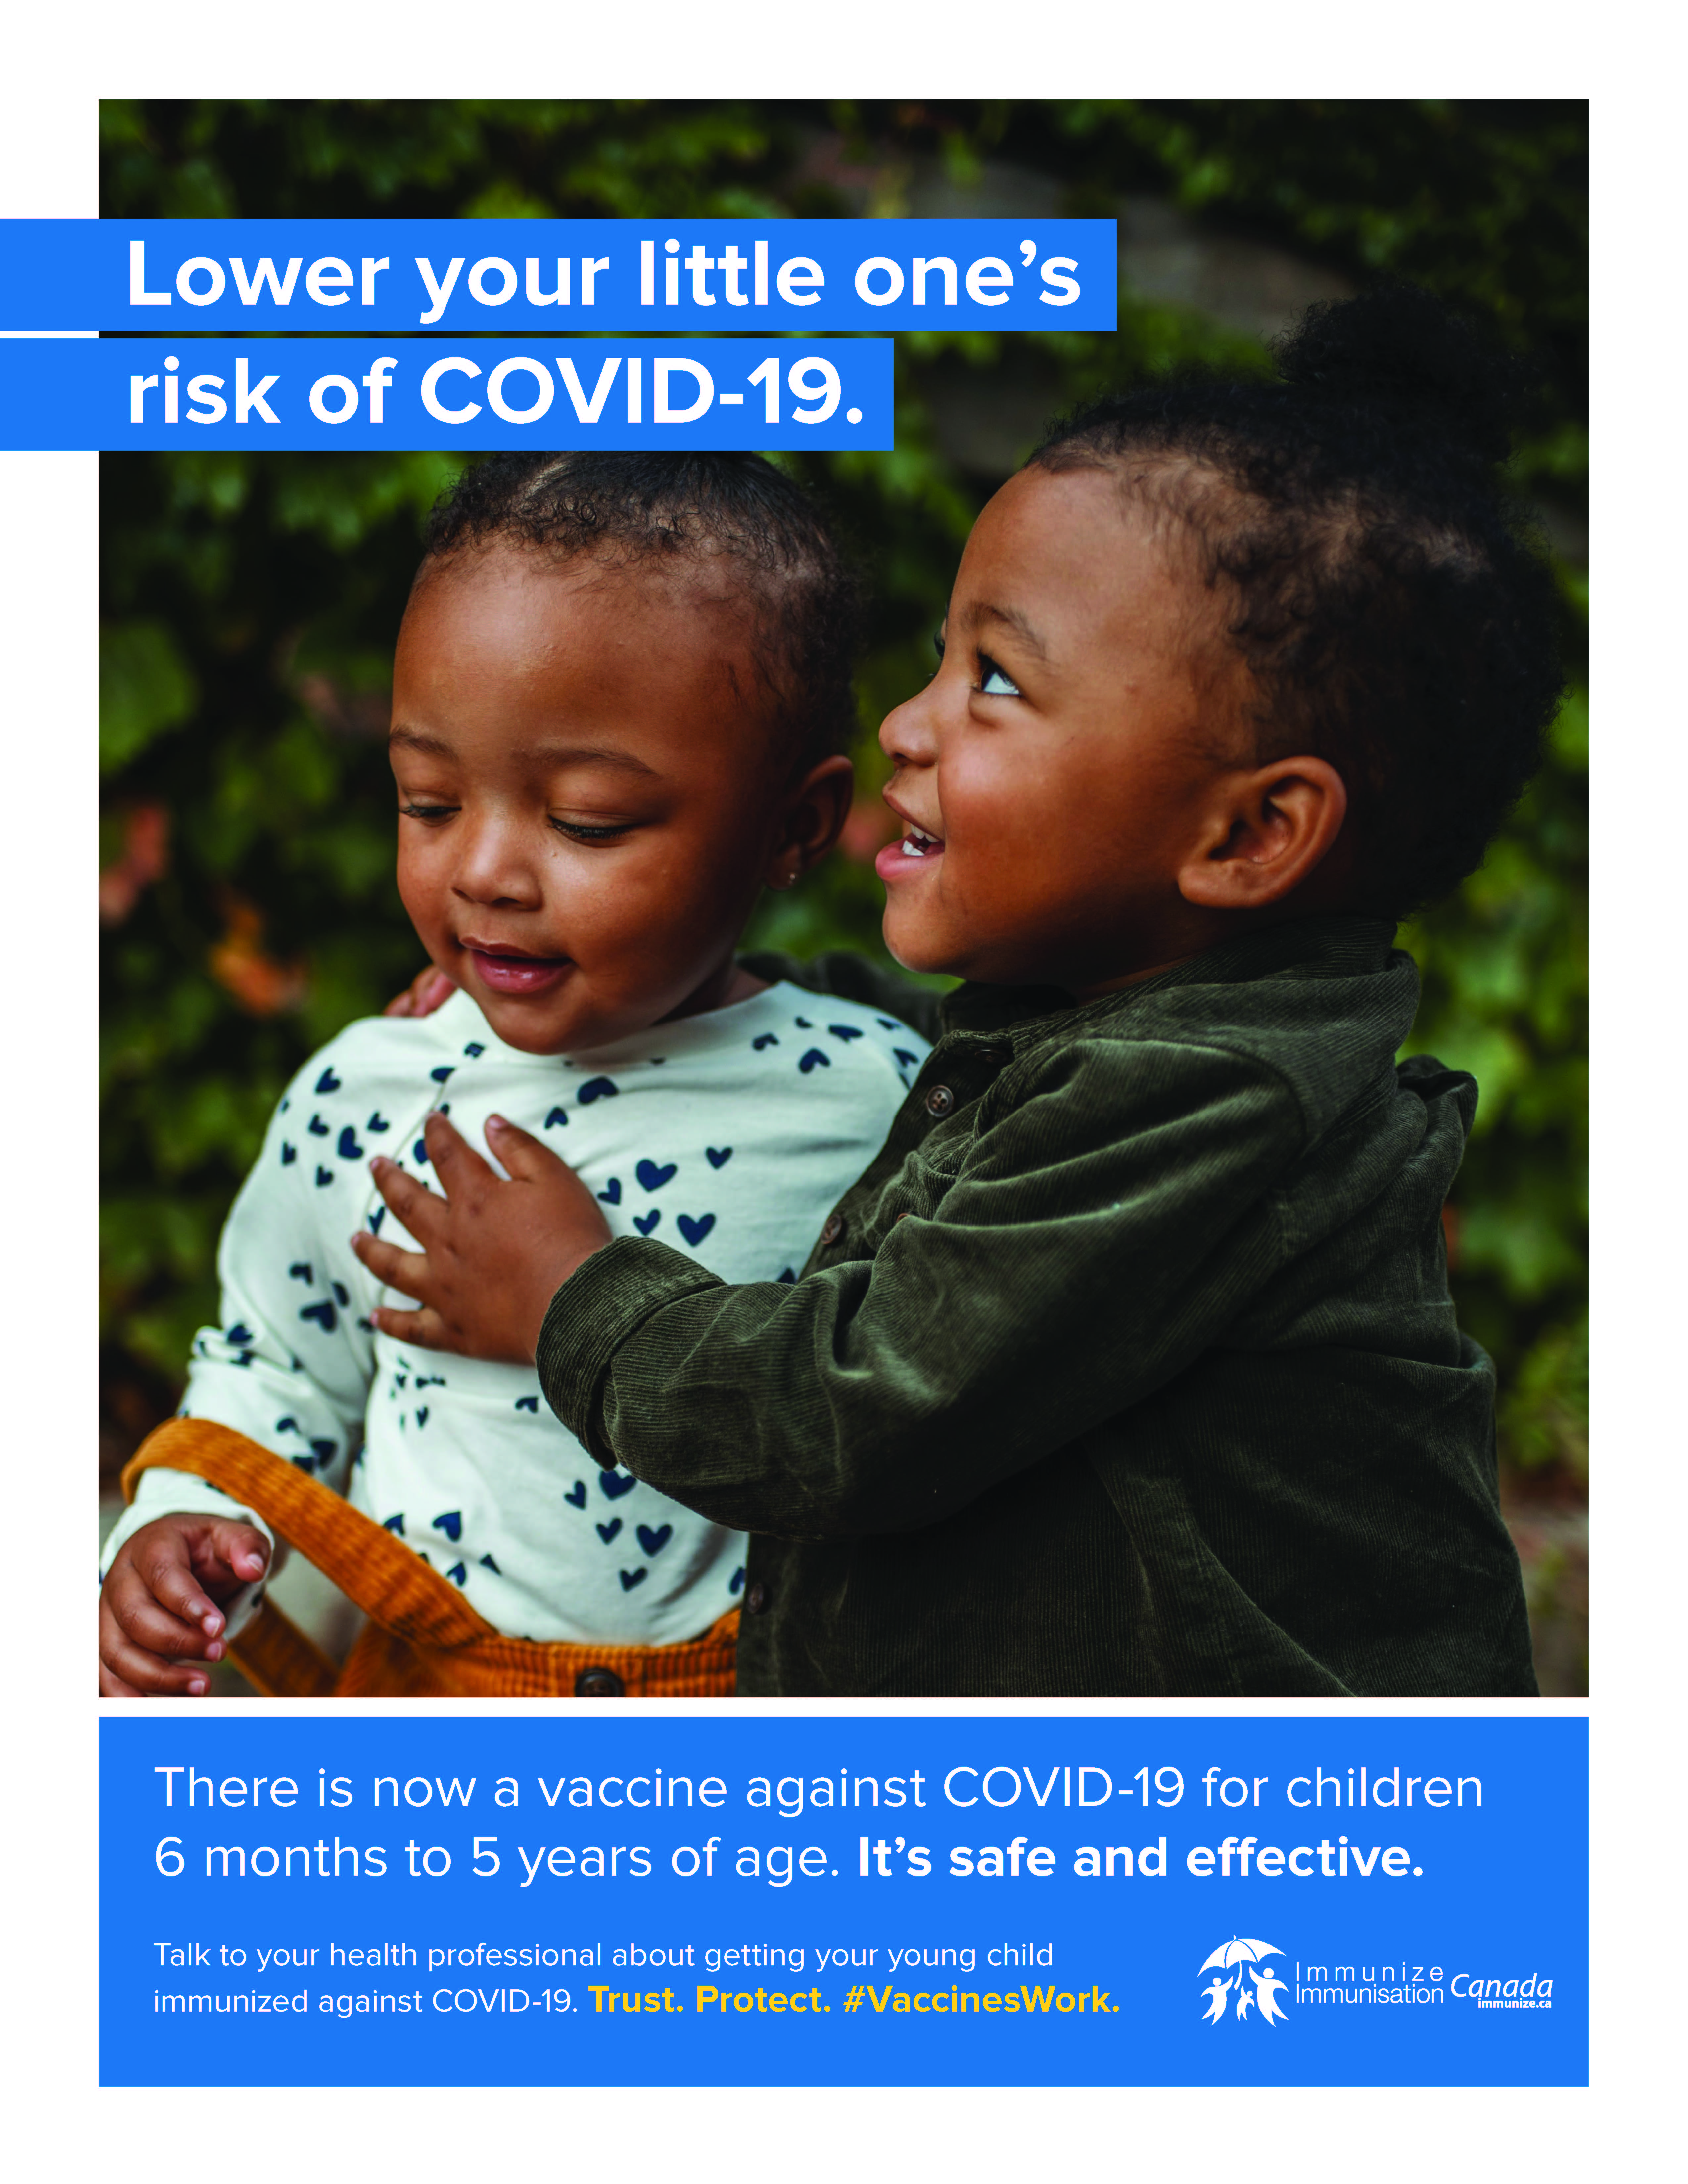 Lower your little one's risk of COVID-19.